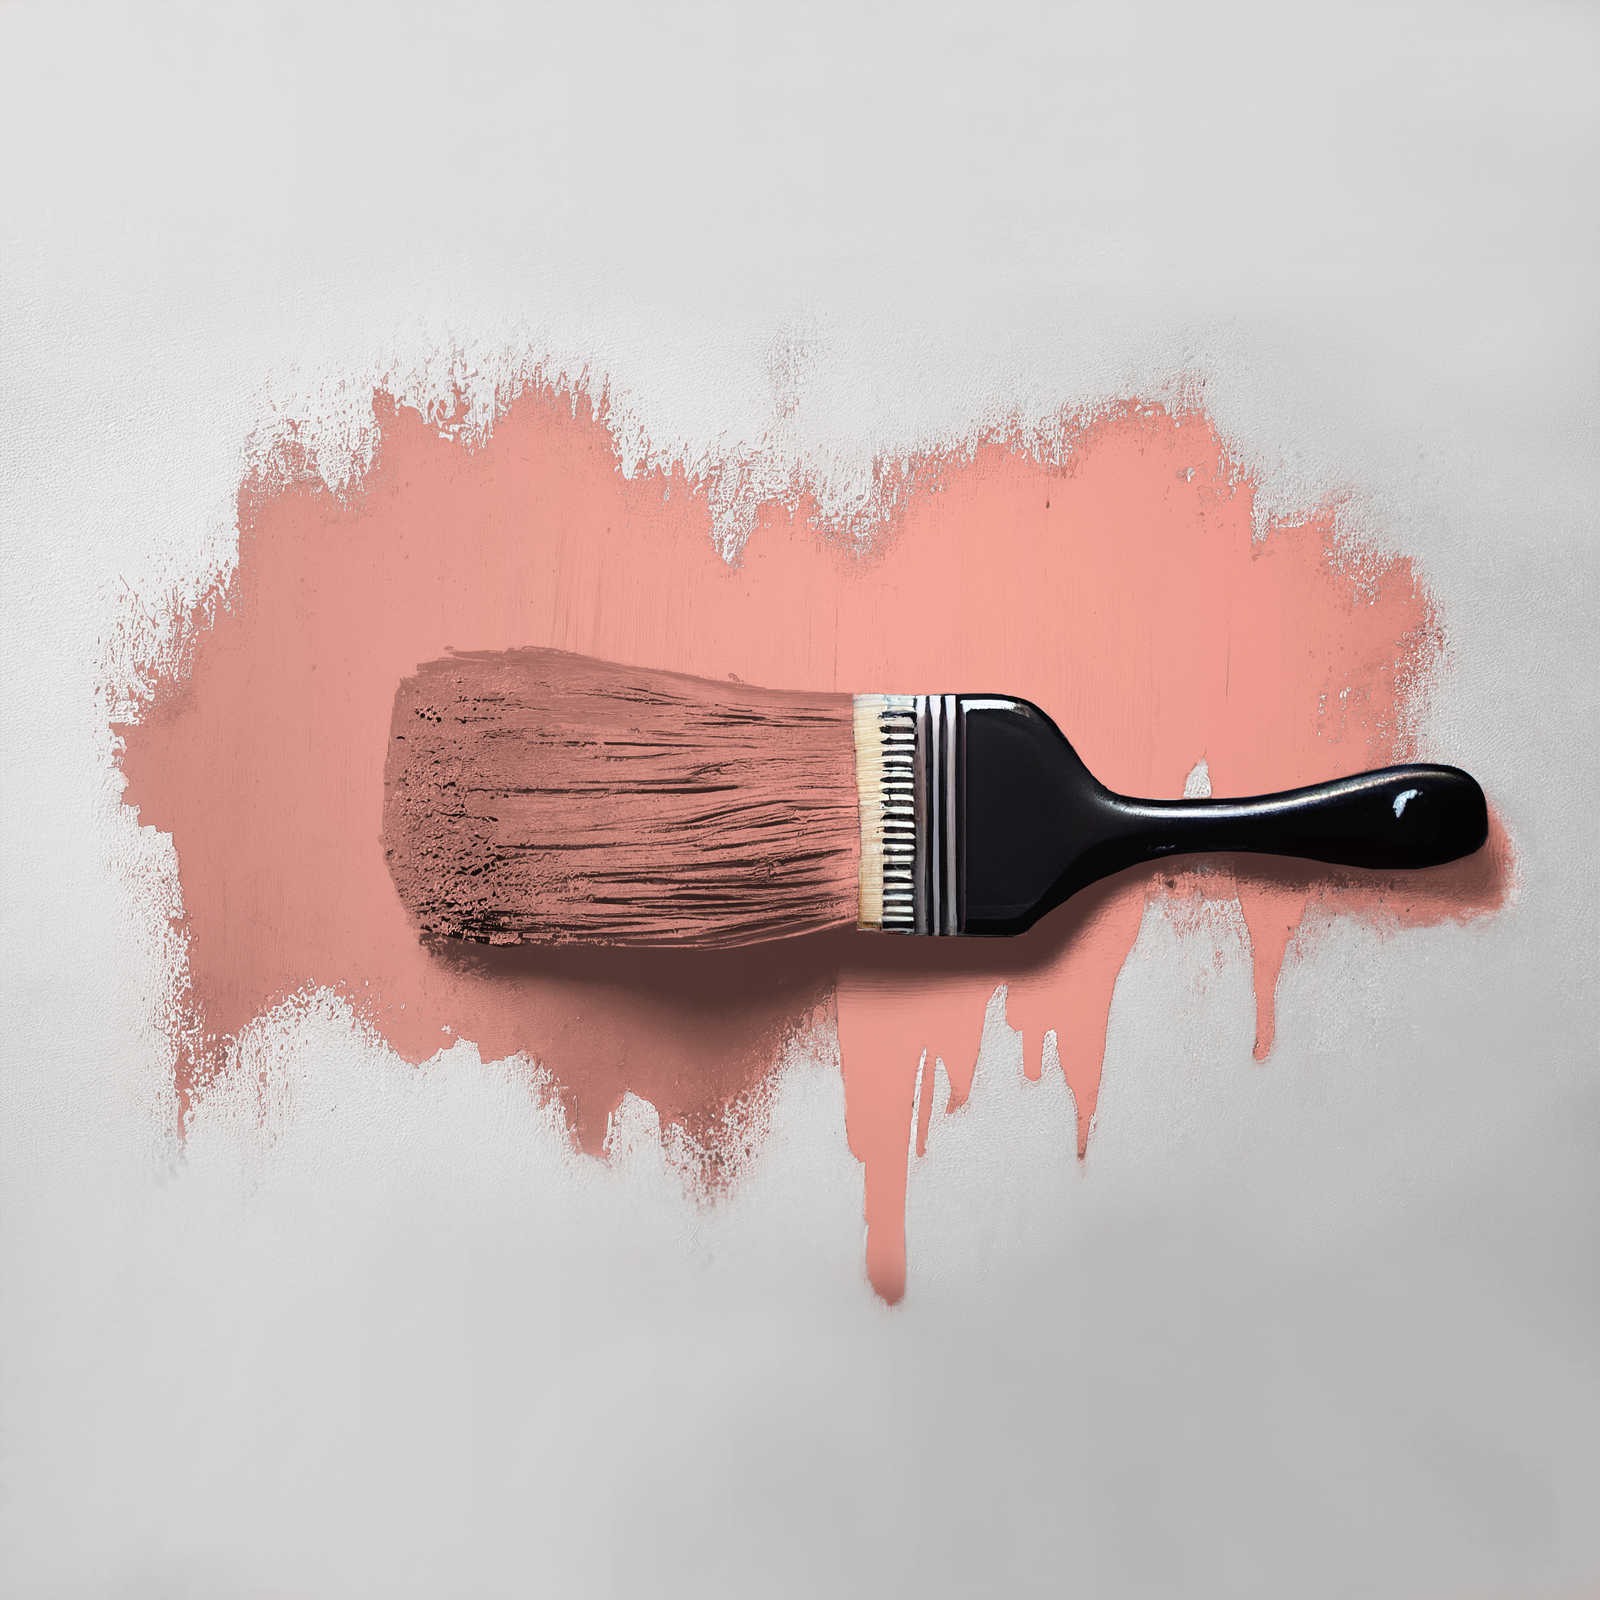             Wall Paint TCK7004 »Georgeous Grapefruit« in bright coral – 5.0 litre
        